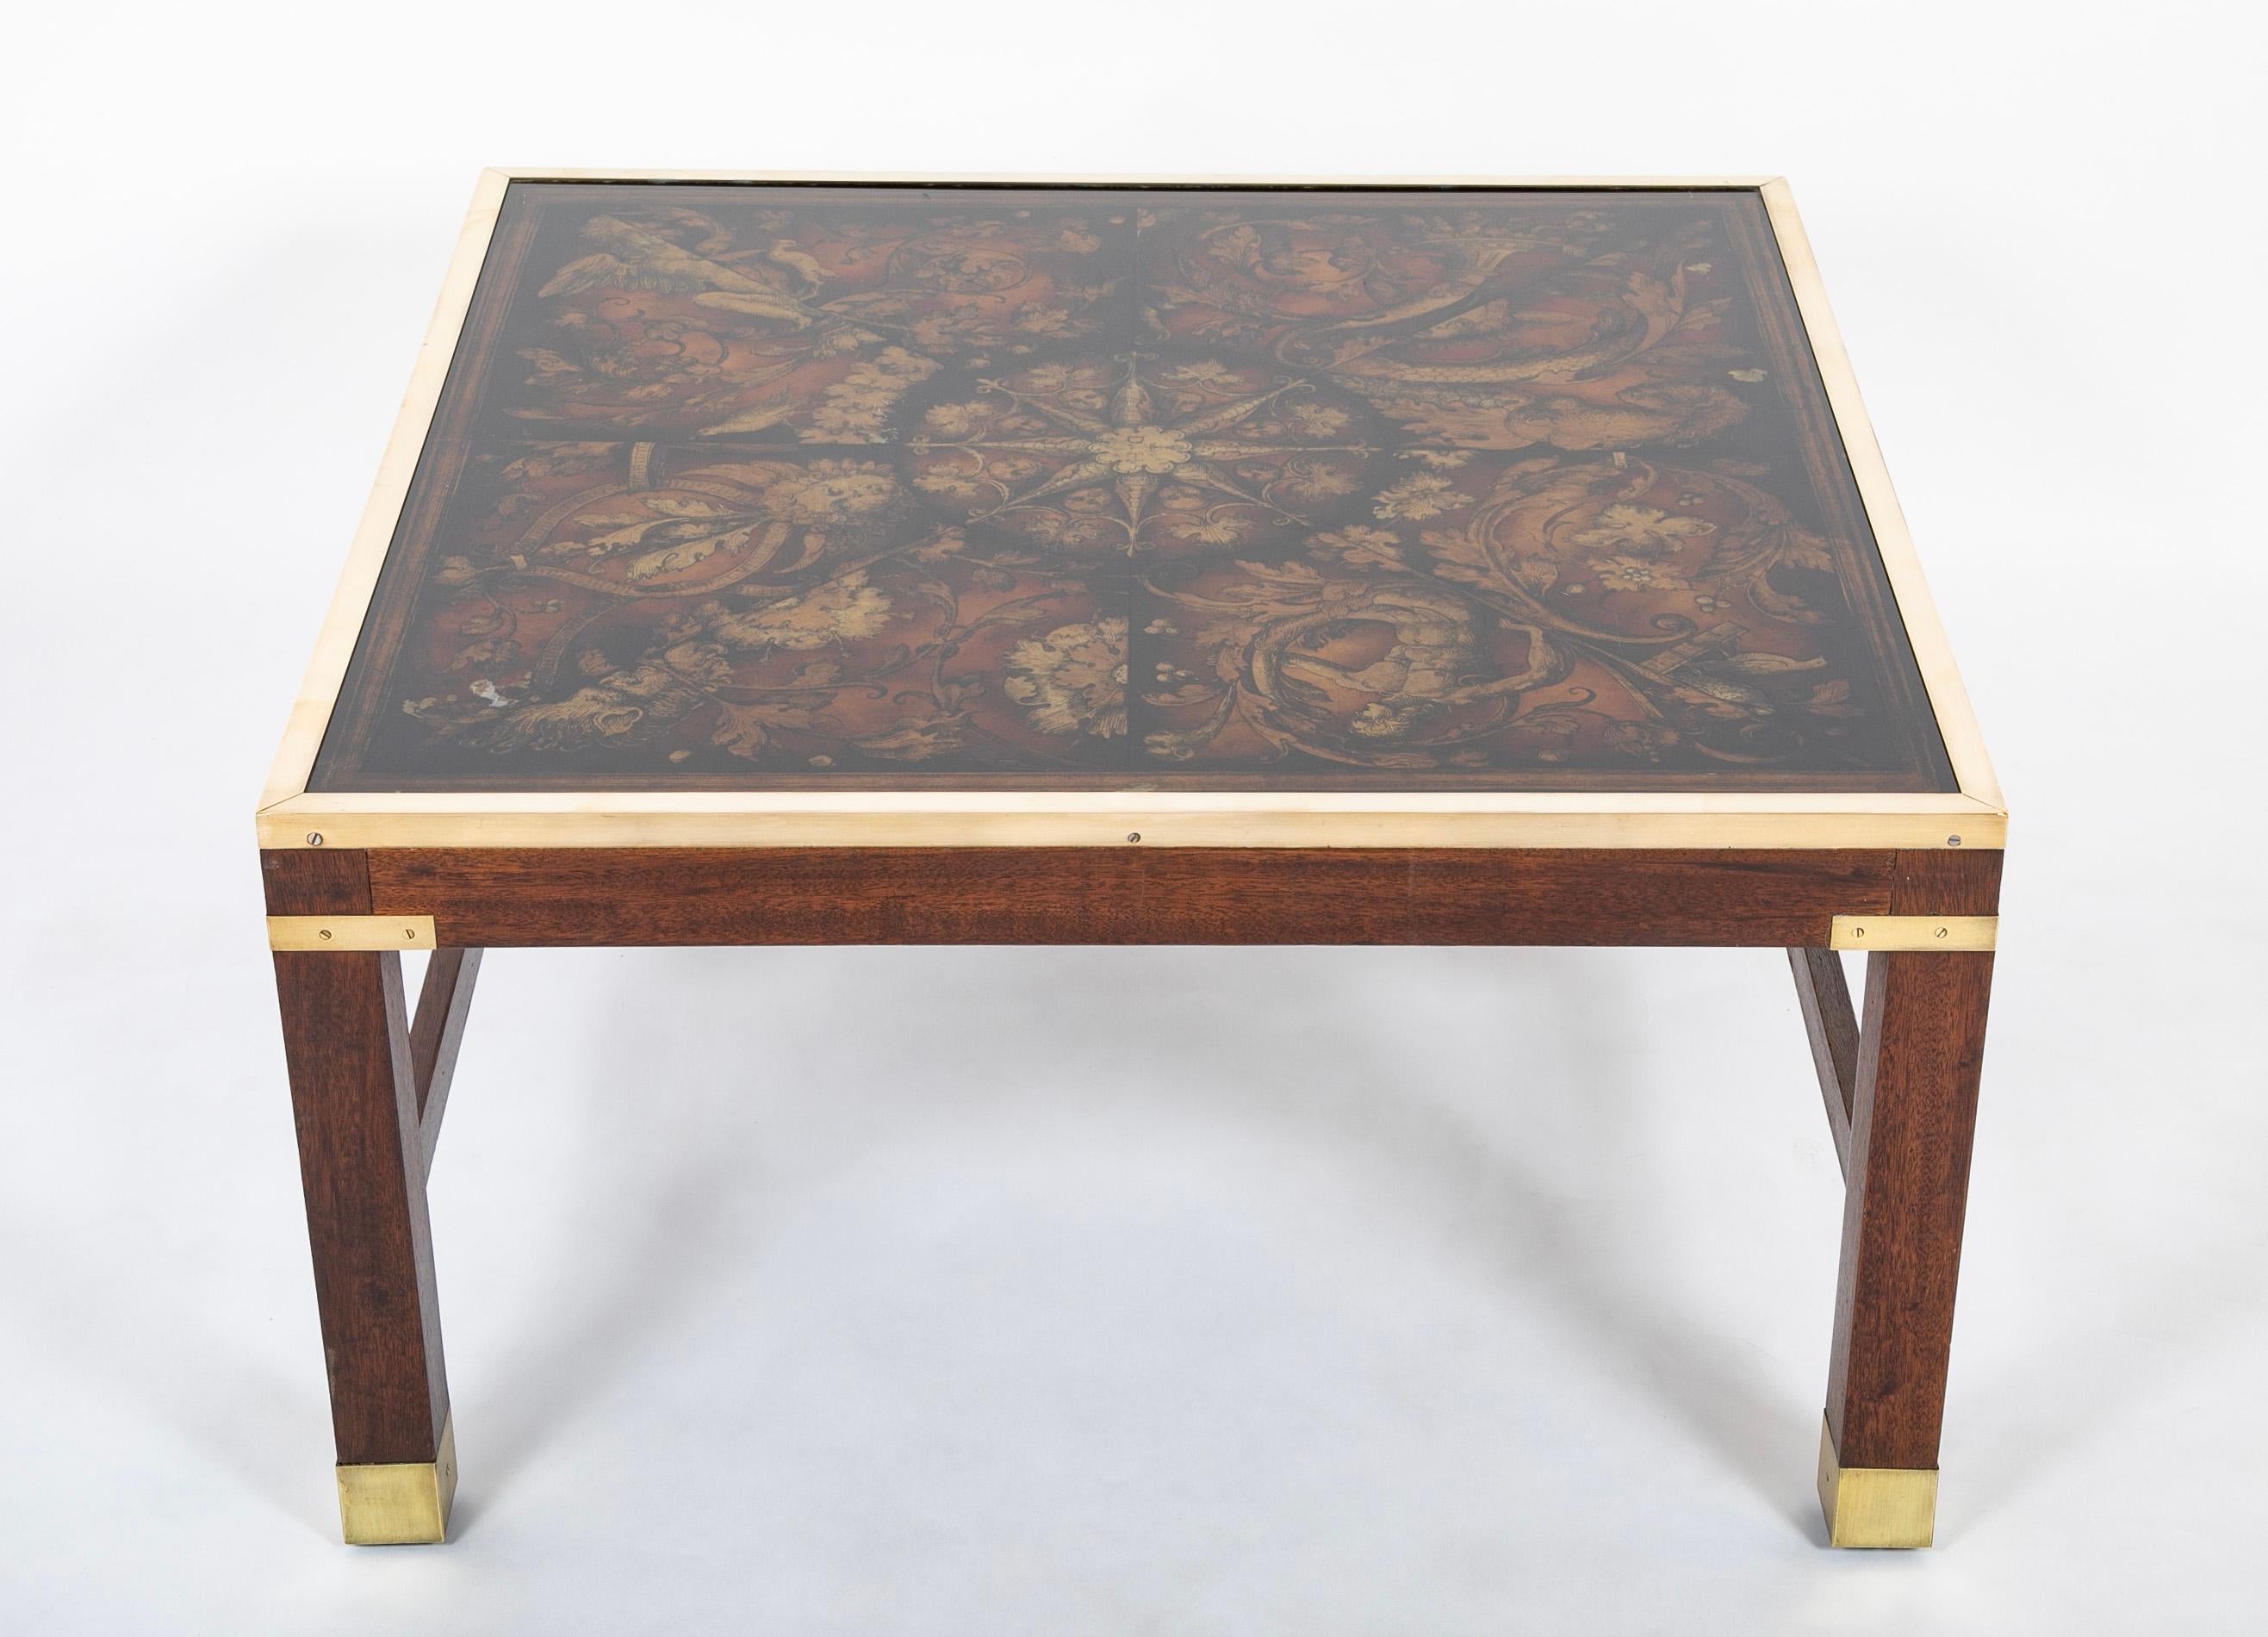 A very interesting mid-20th century Fornesetti style glass top coffee table on a walnut base with brass mounts and border. Unusual and intriguing reverse printed glass top with acanthus leaves and mythological figures radiating out of a compass like